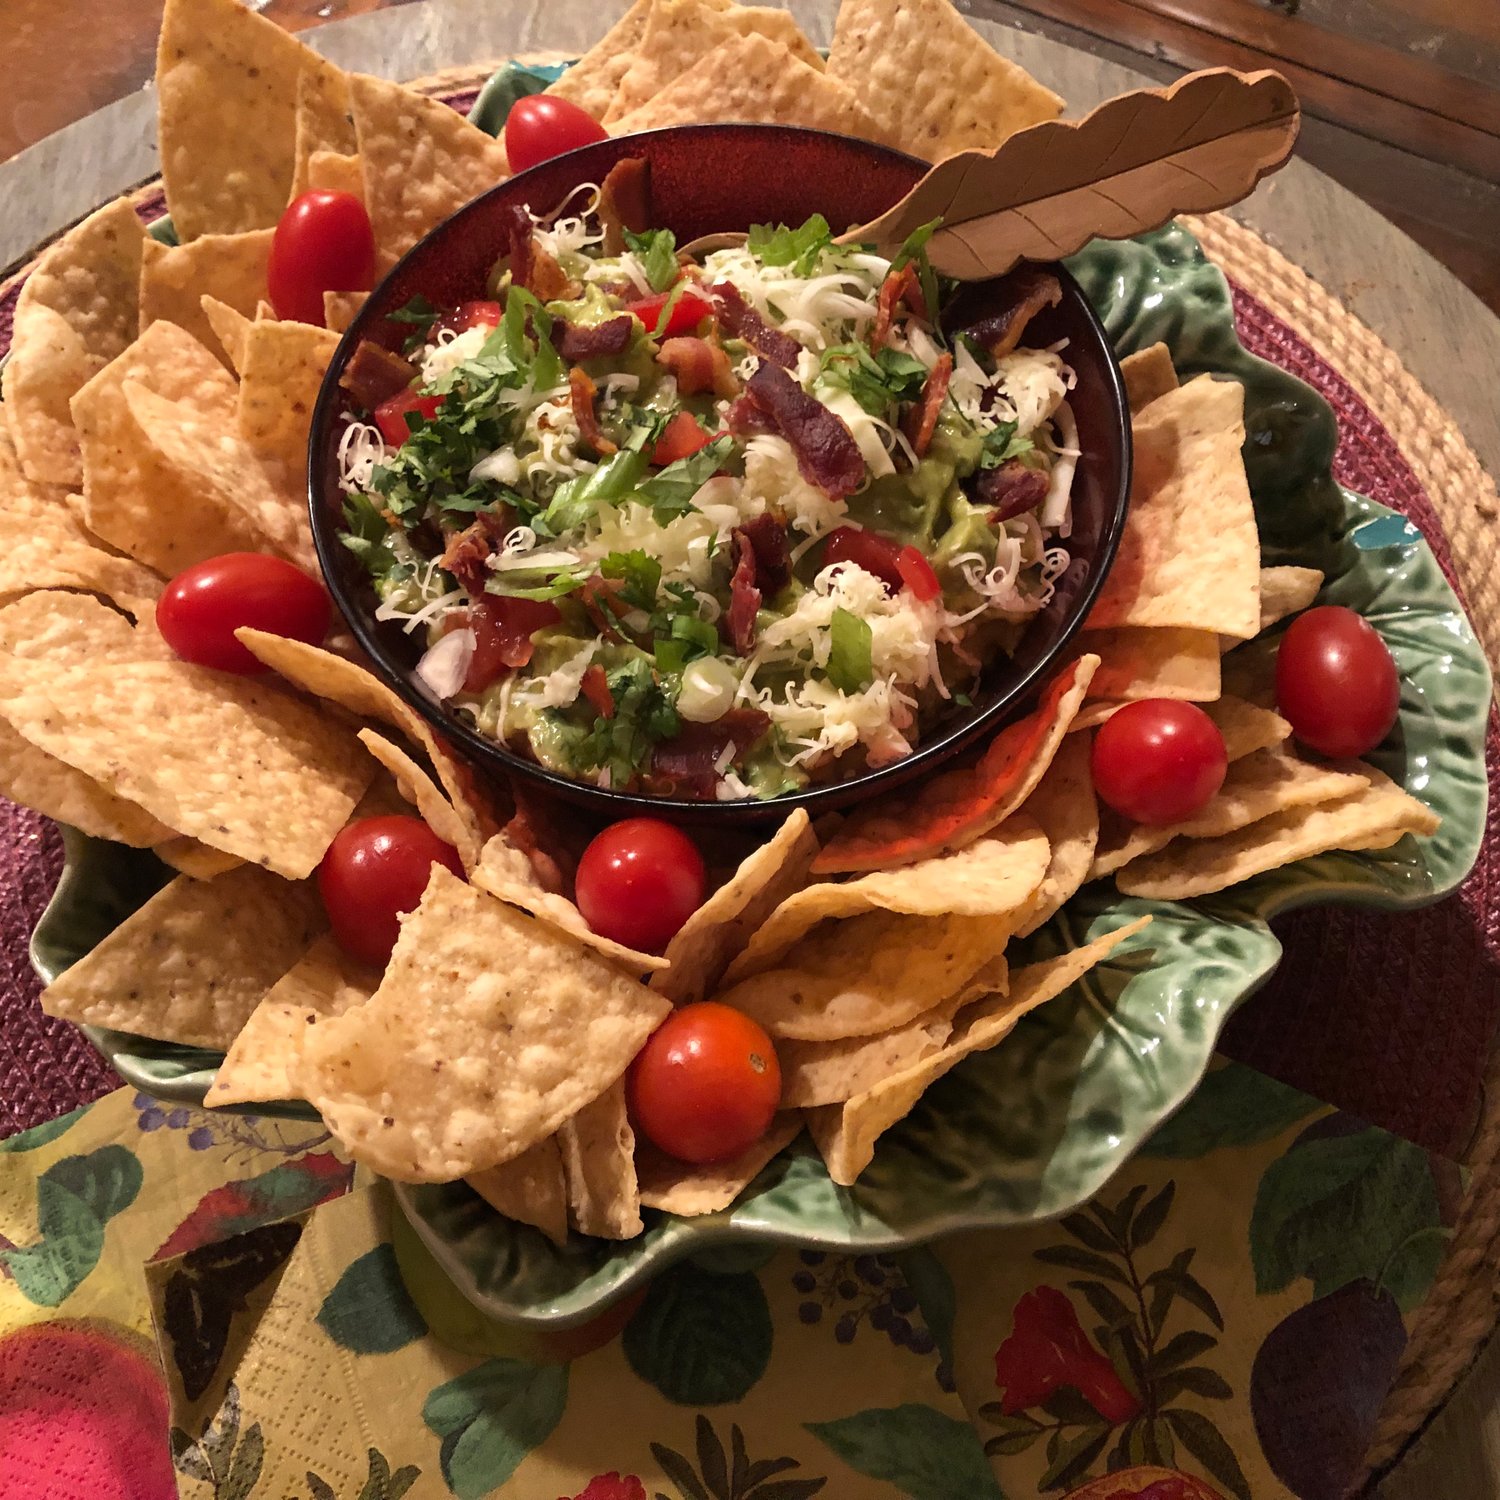 Winter Guacamole is kicked up a notch through the addition of crisp, crumbled bacon, cheddar cheese and plum tomatoes.